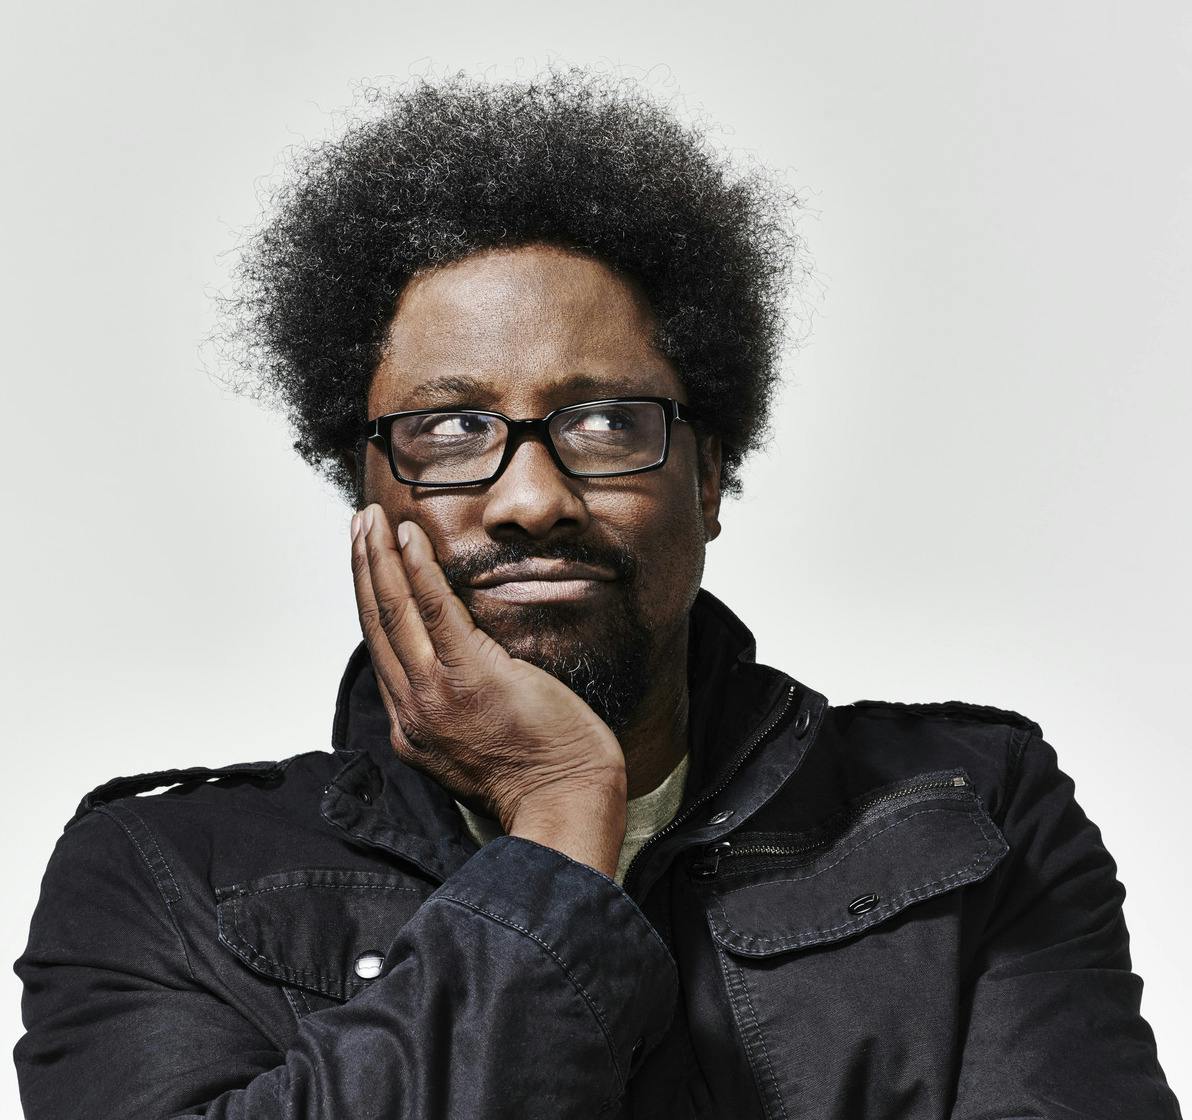 Episode 18: Japanese Energy Drinks with W. Kamau Bell